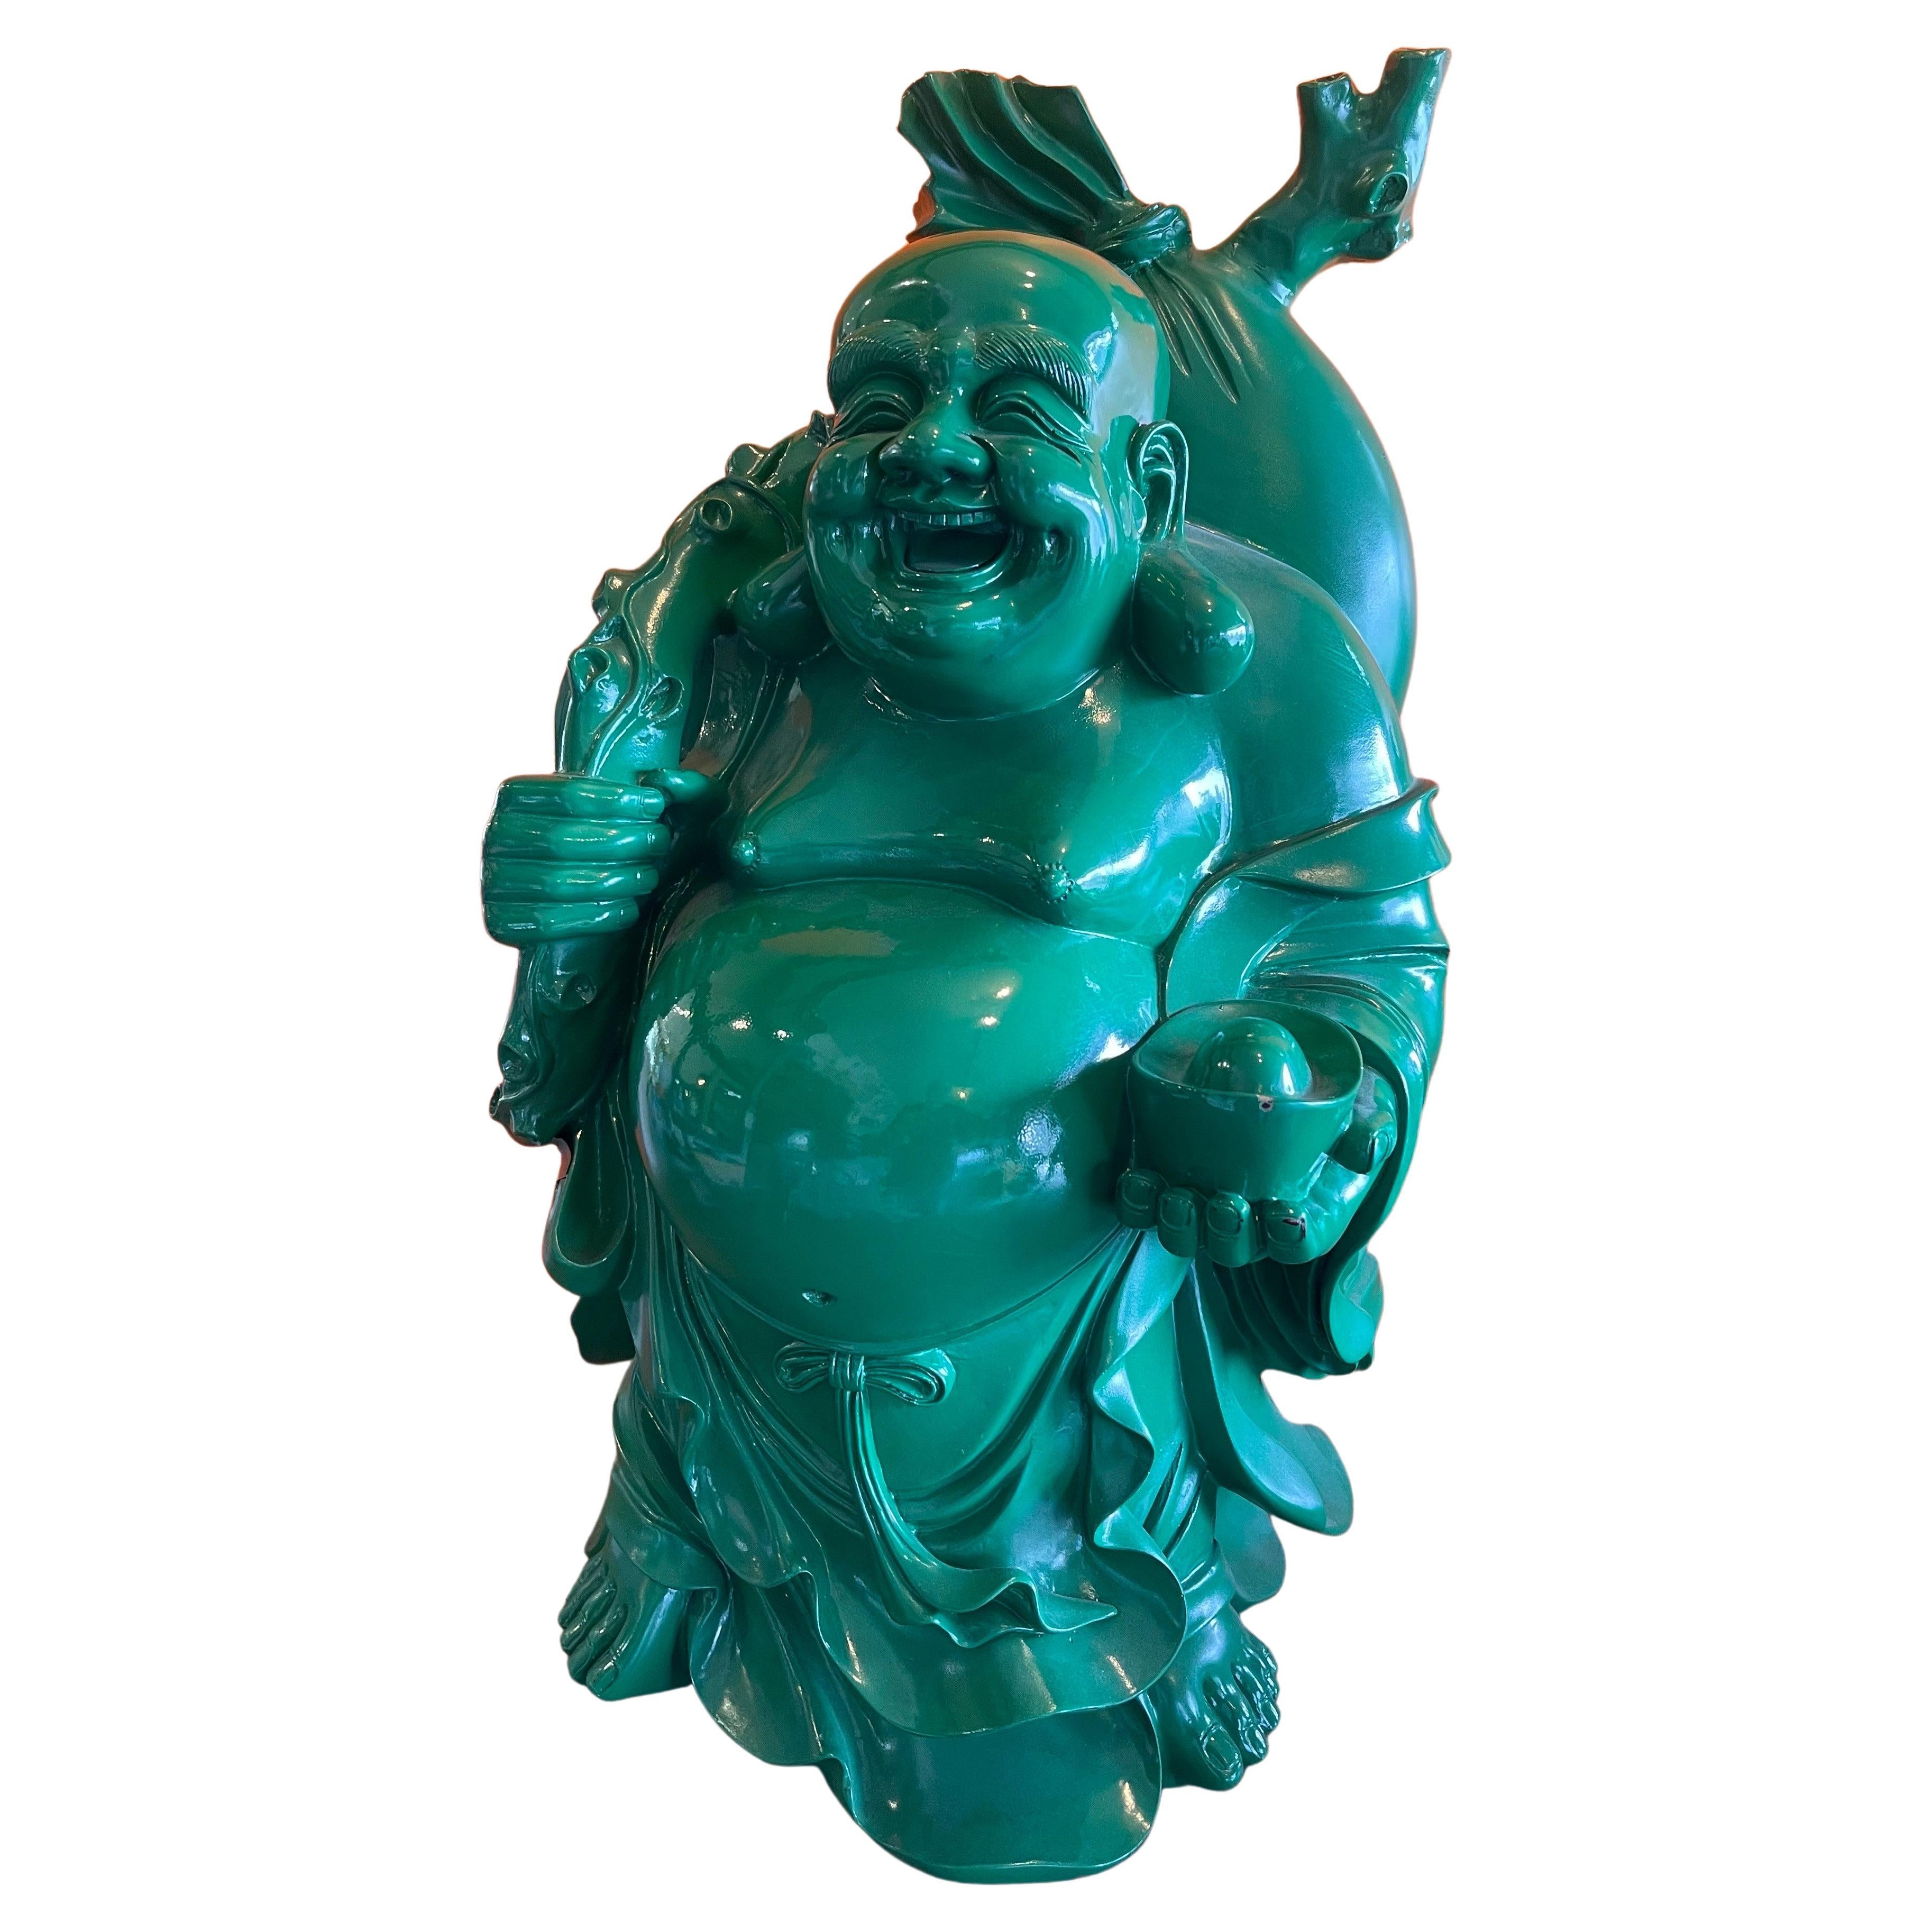 Massive Vintage Green Resin "Happy Buddha" Sculpture For Sale